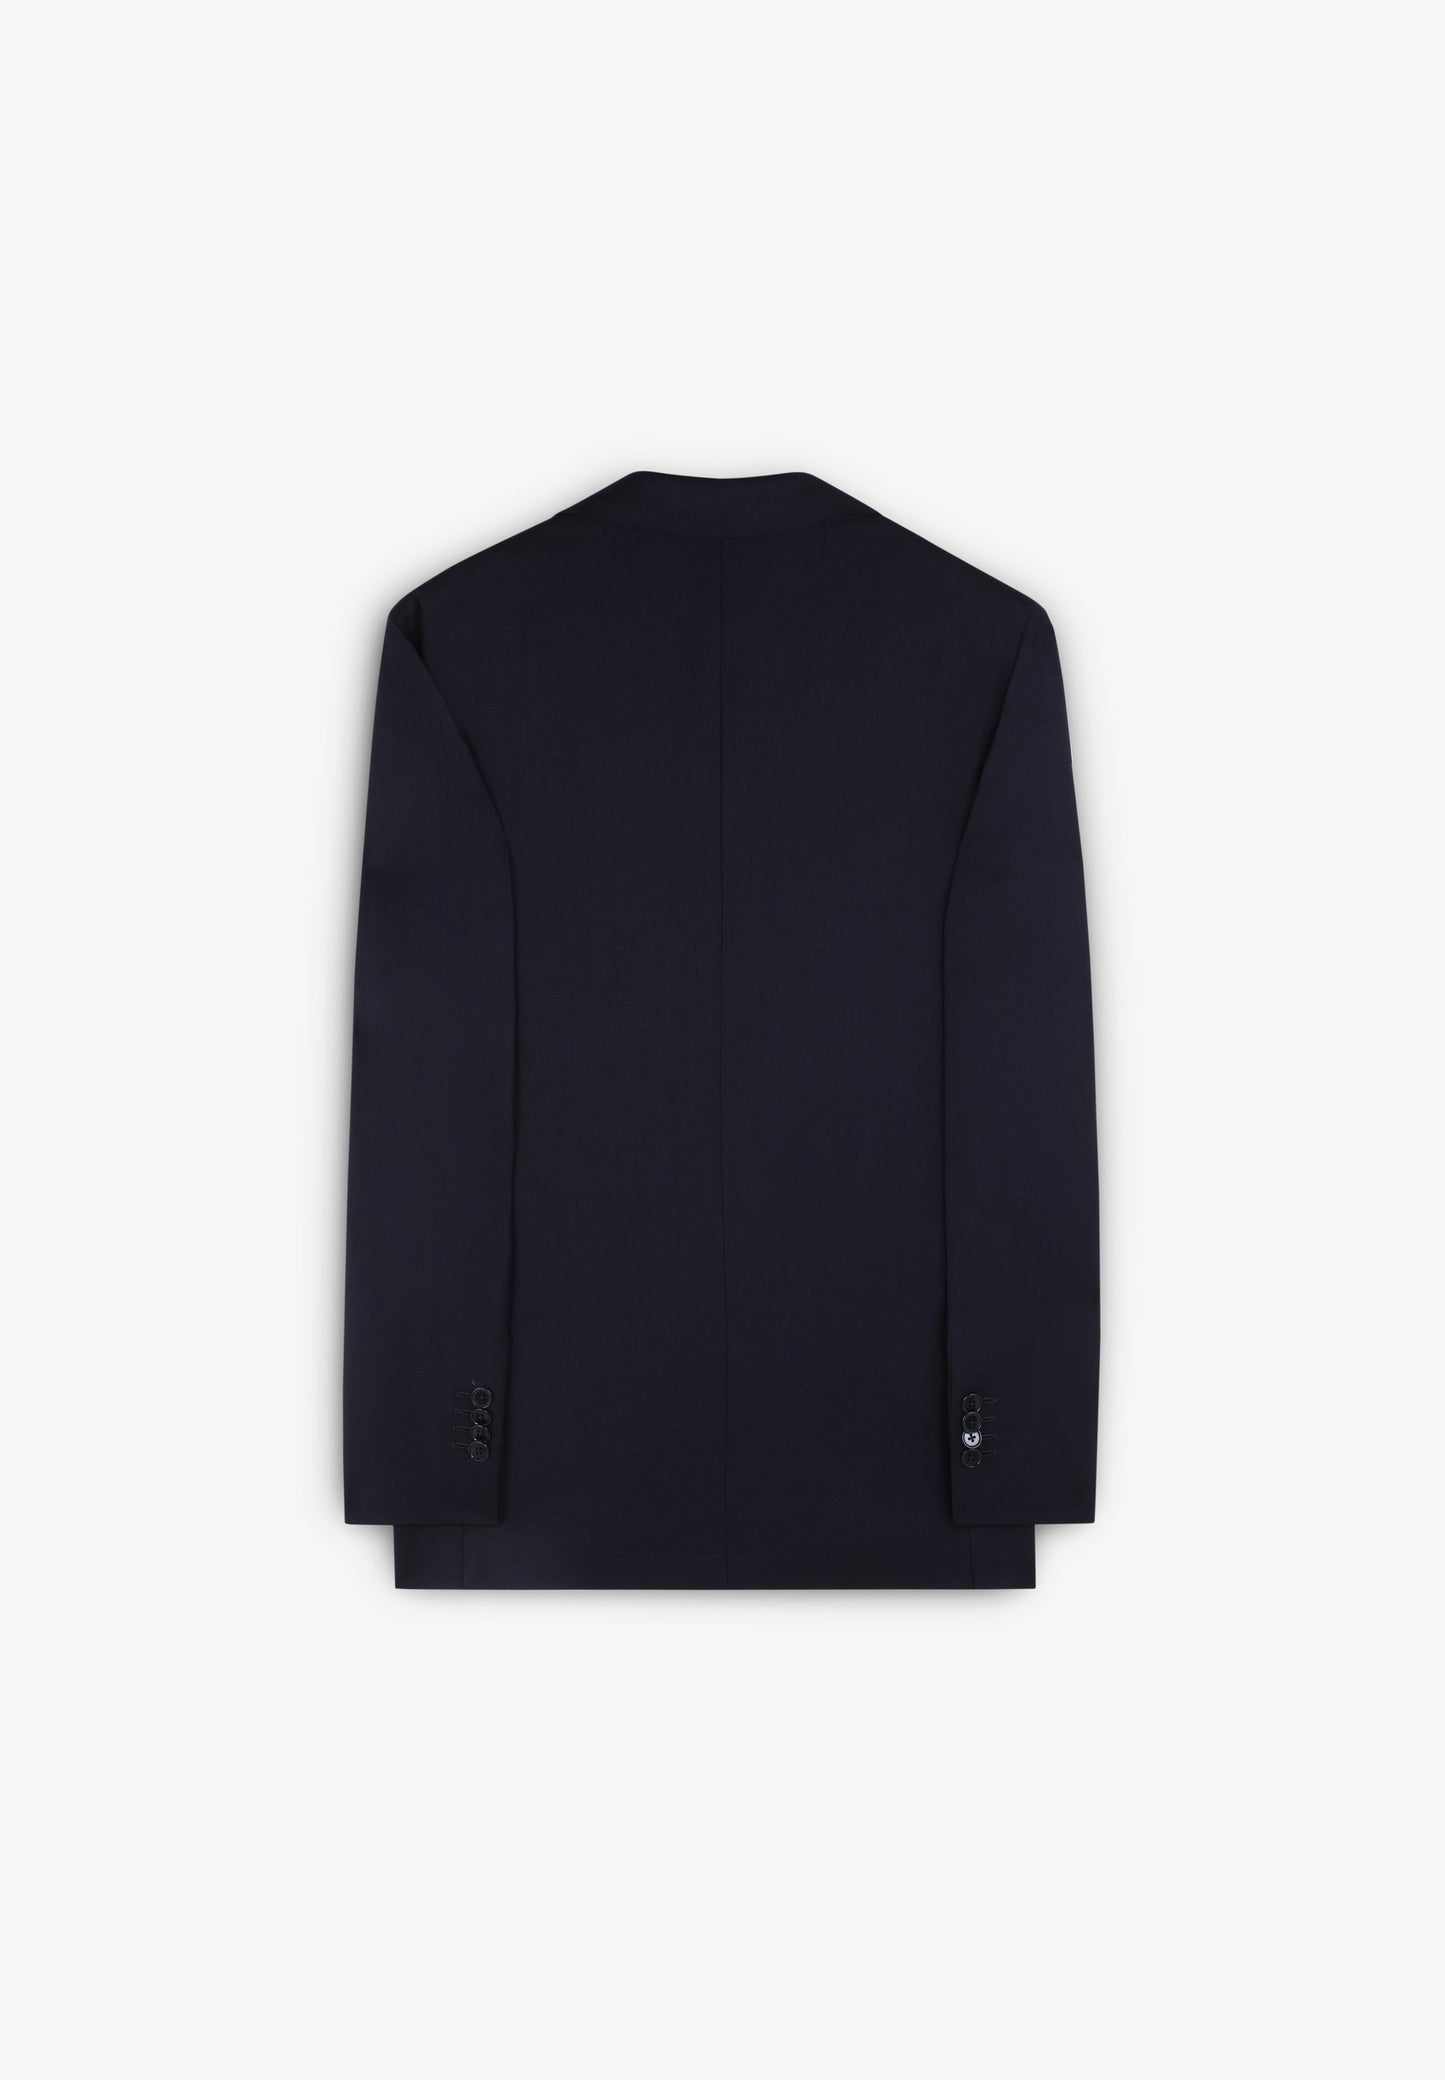 NAVY BLUE TEXTURED SUIT WITH POCKETS